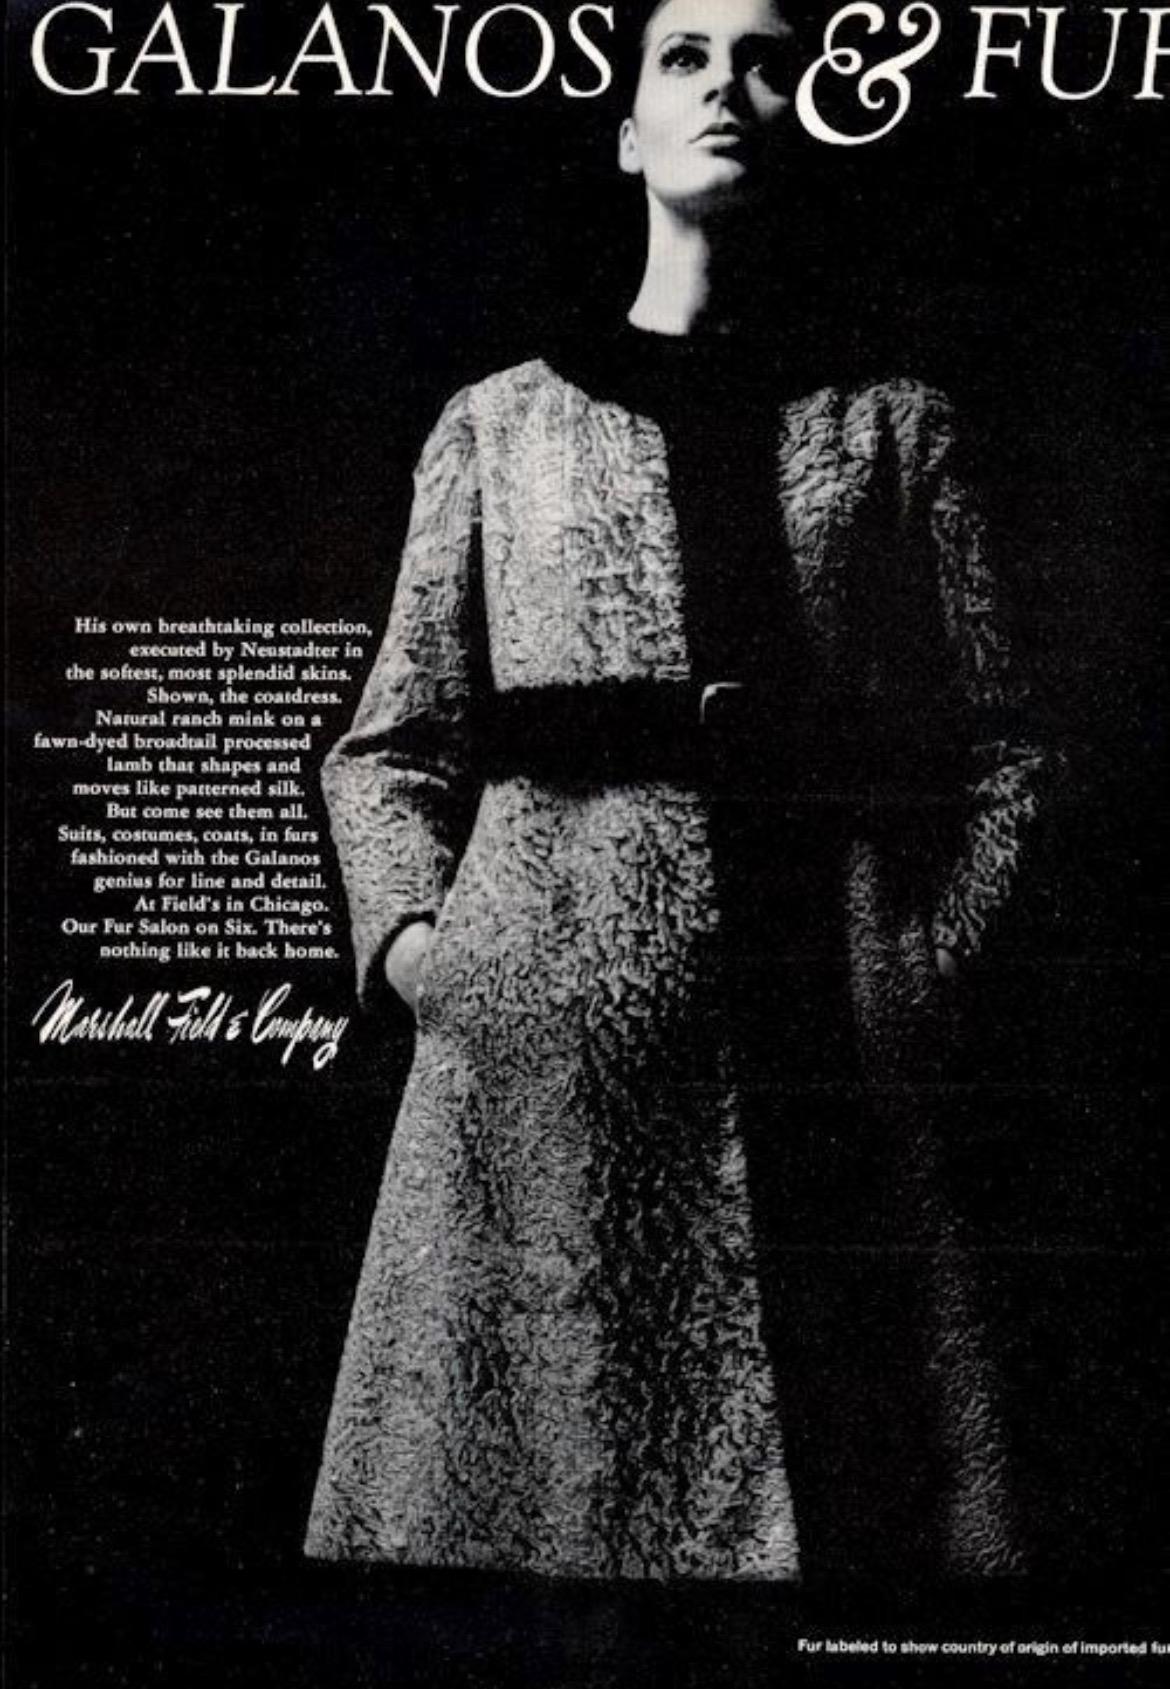 Presenting an incredible black Persian lamb James Galanos couture dress and jacket set. From the 1960s, this fabulous set consists of a dress and matching coat constructed entirely of Persian lamb fur. A 1968 Galanos ad for Marshall Field